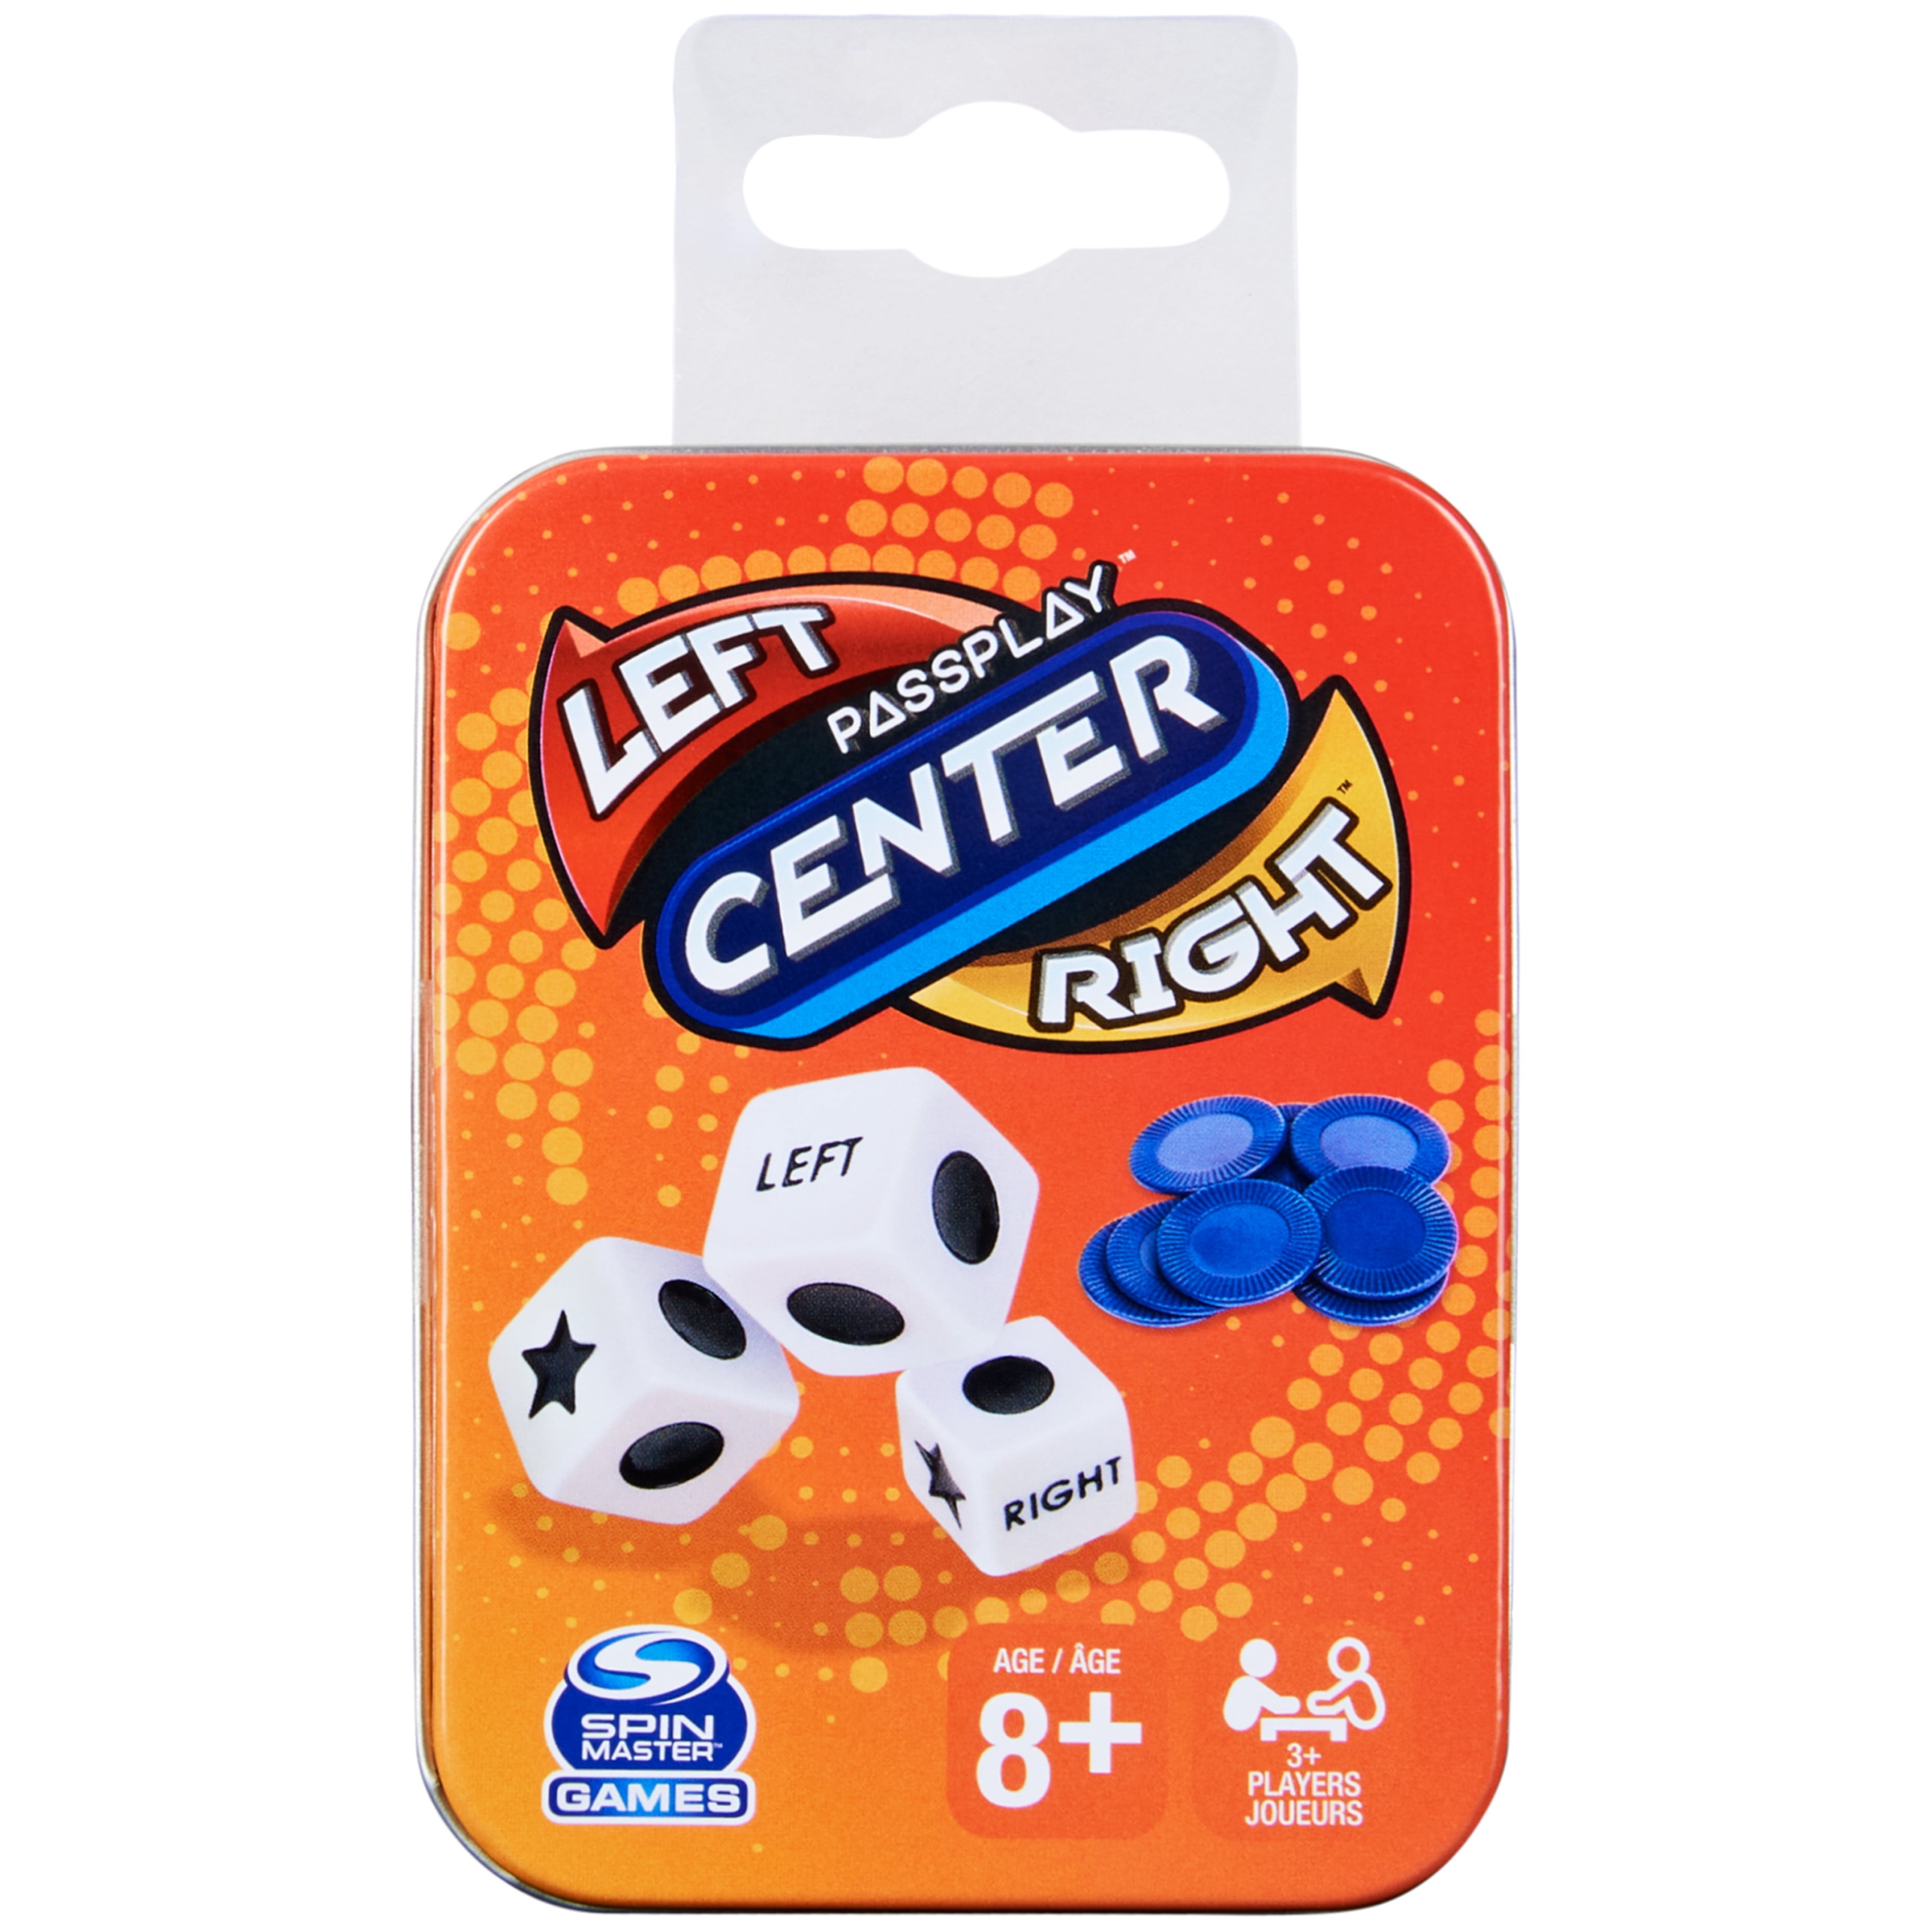 Passplay: The Game of Left Center Right, the Classic Dice Game in a Portable, Giftable Tin